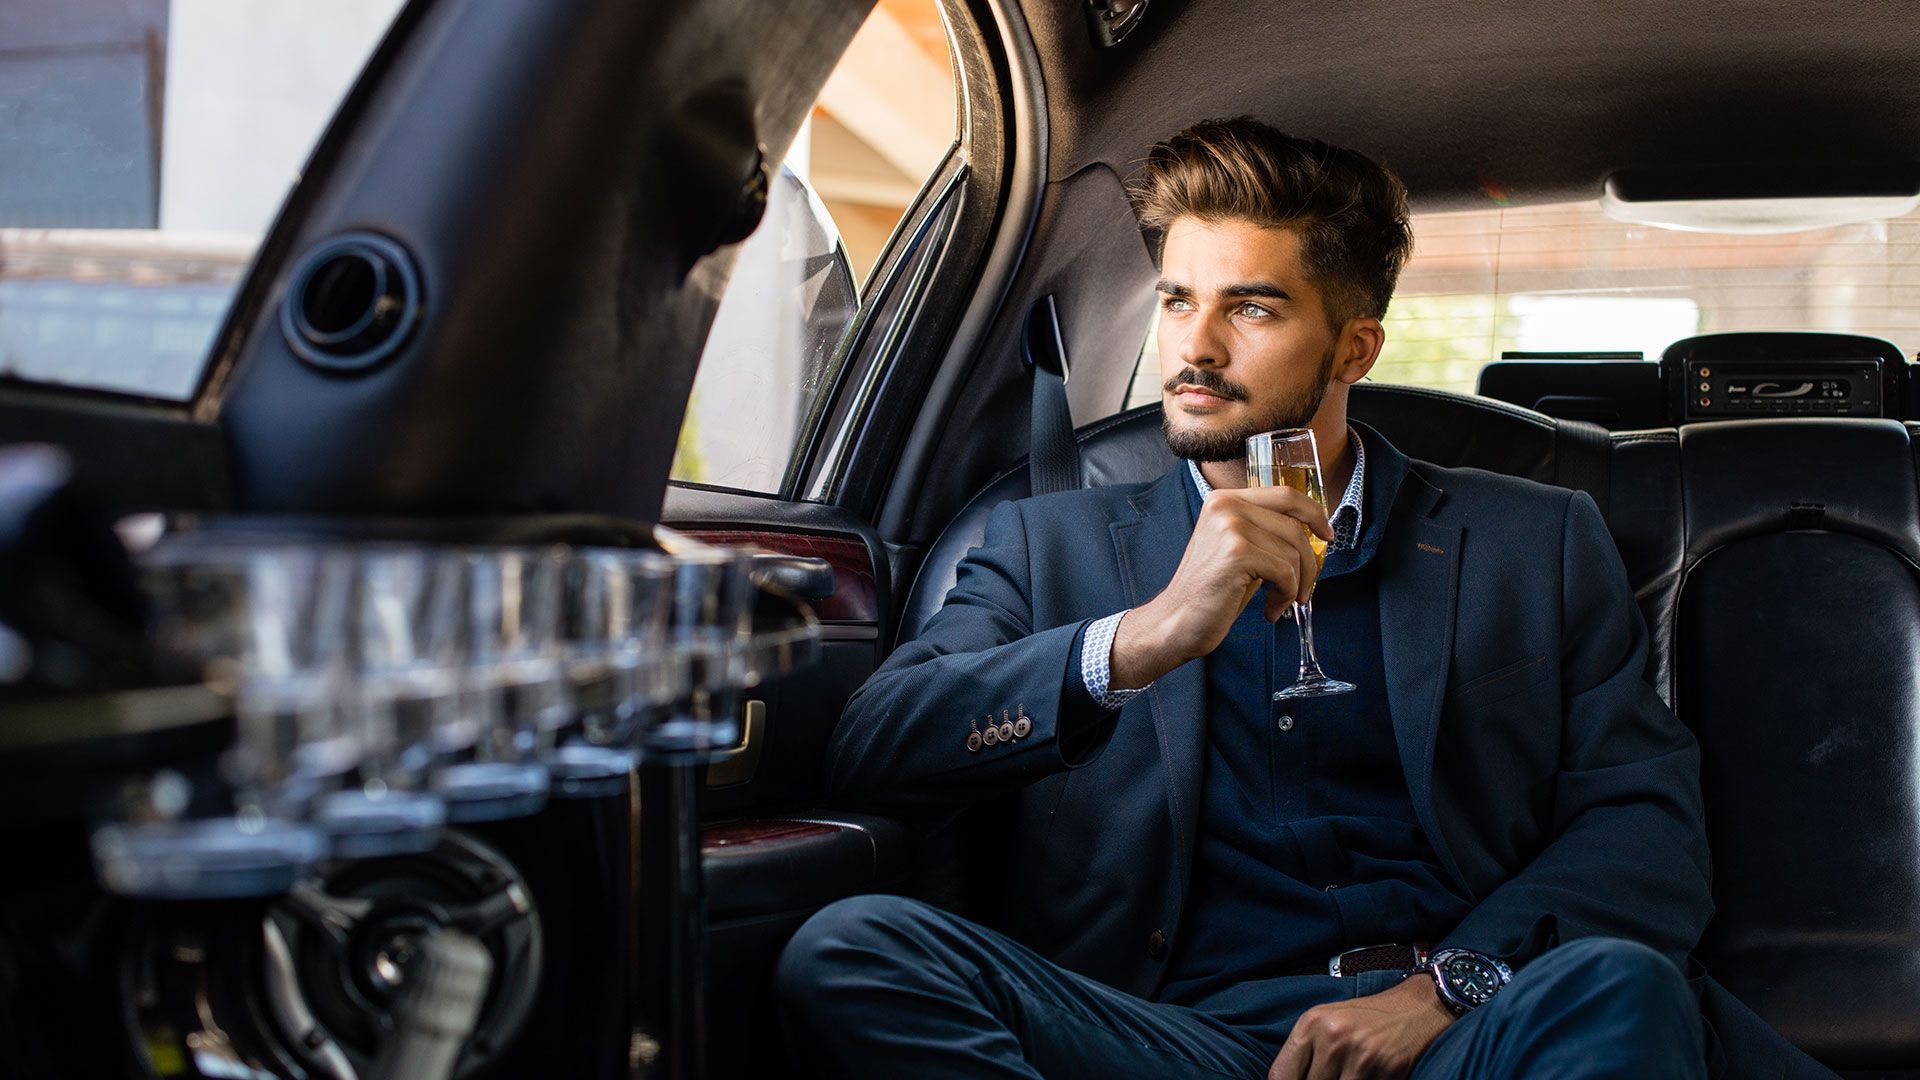 A man is sitting in the back seat of a limousine drinking a glass of wine.